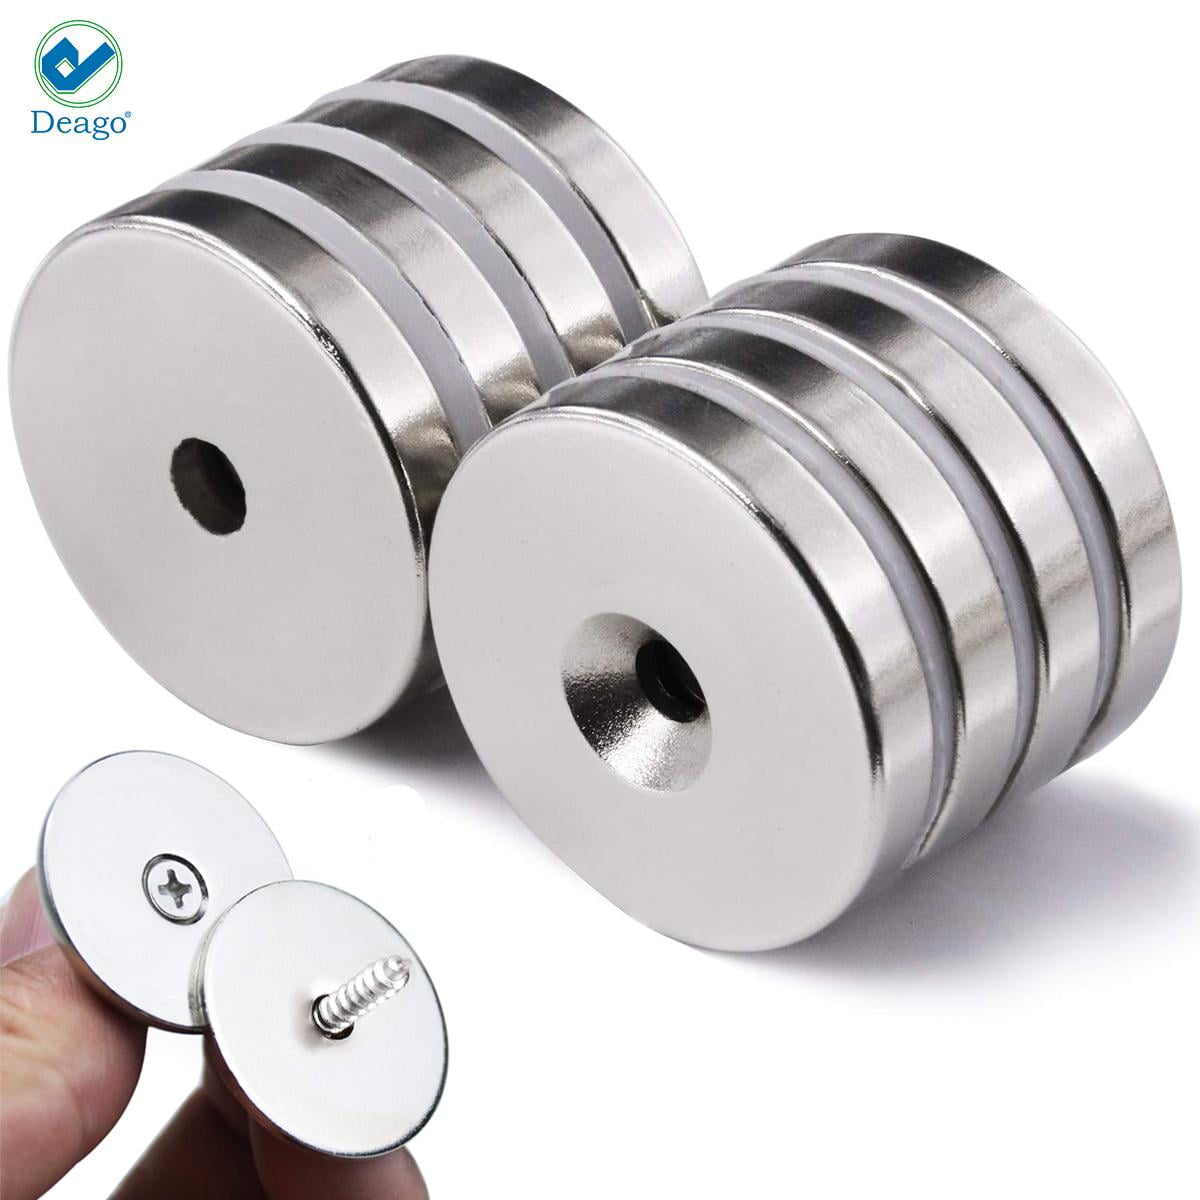 350-1300LBS Single Ring Fishing Magnet Kit Pull Force Heavy Duty Strong  Neodymium Magnet 500LBS